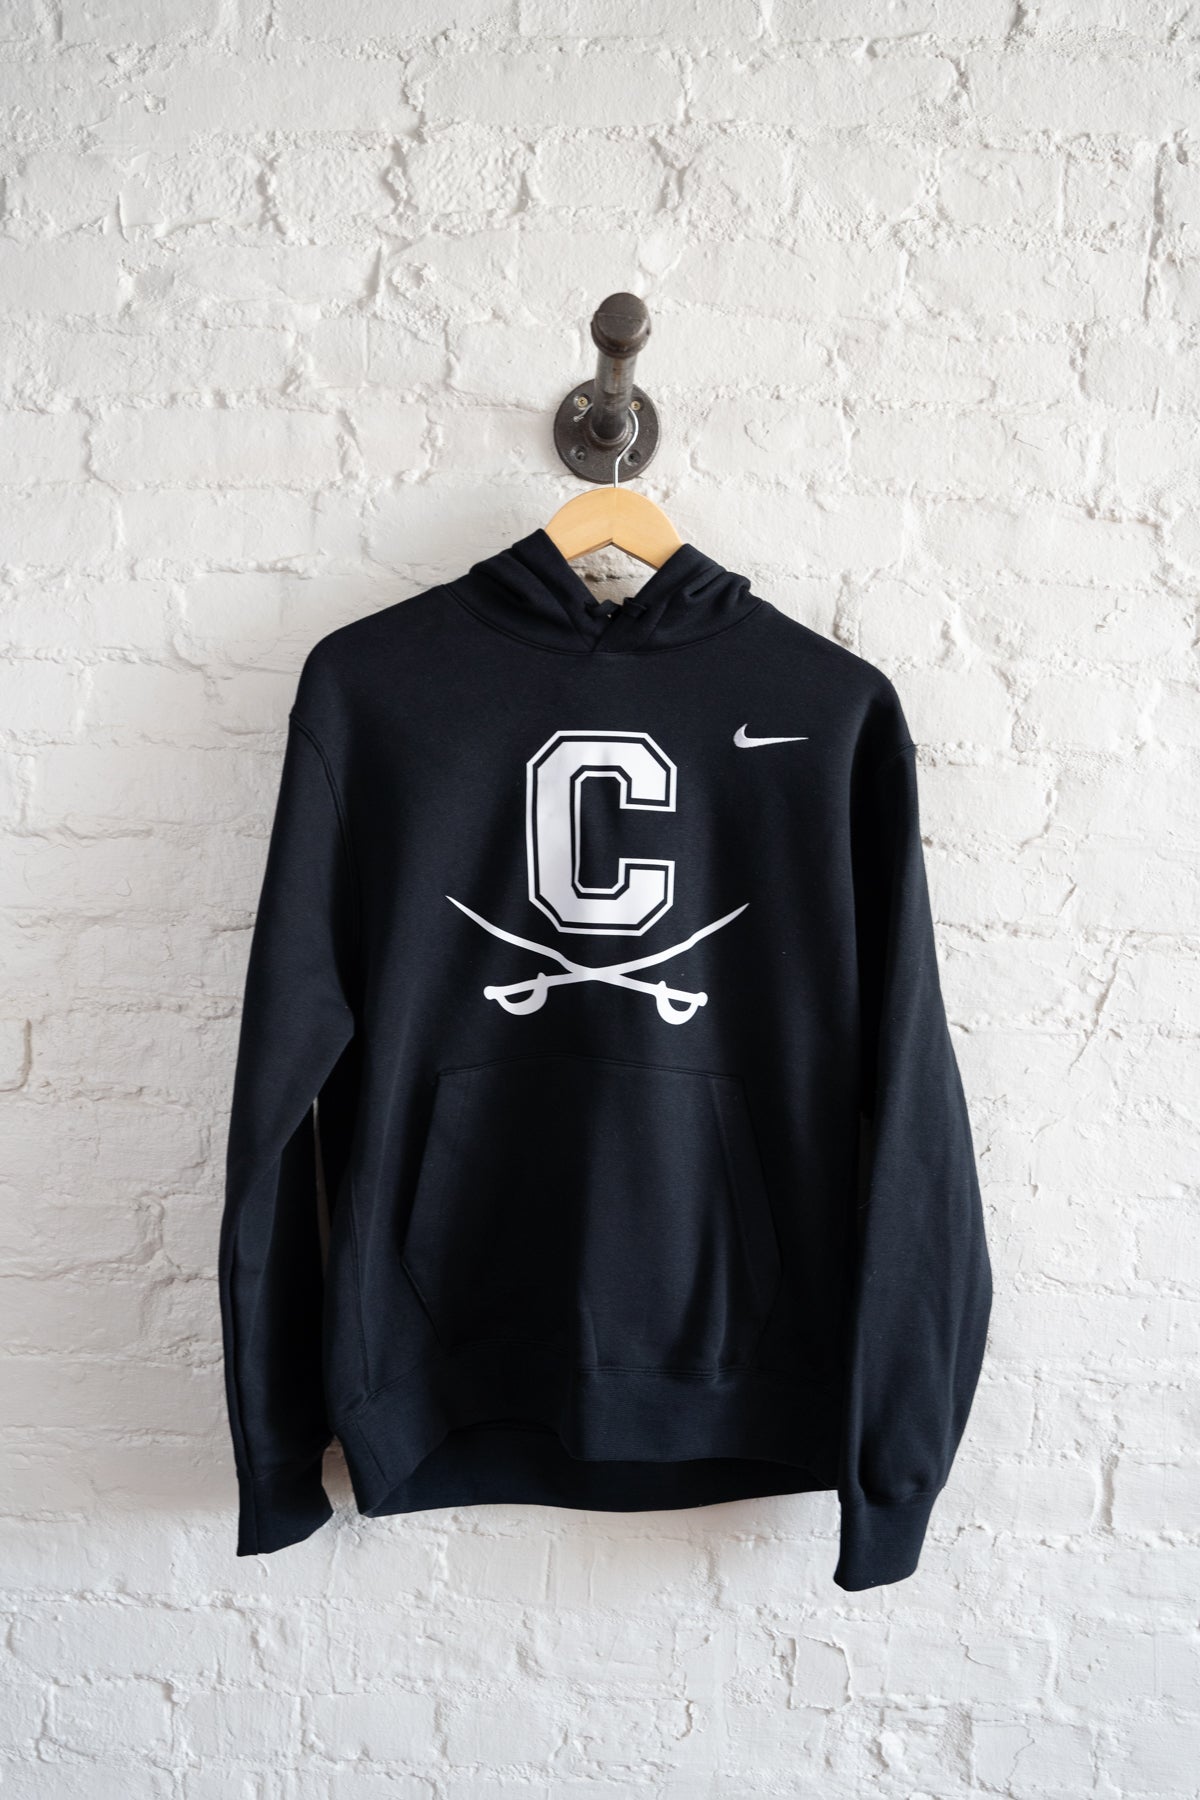 Chillicothe NIKE Hoodie (Black)